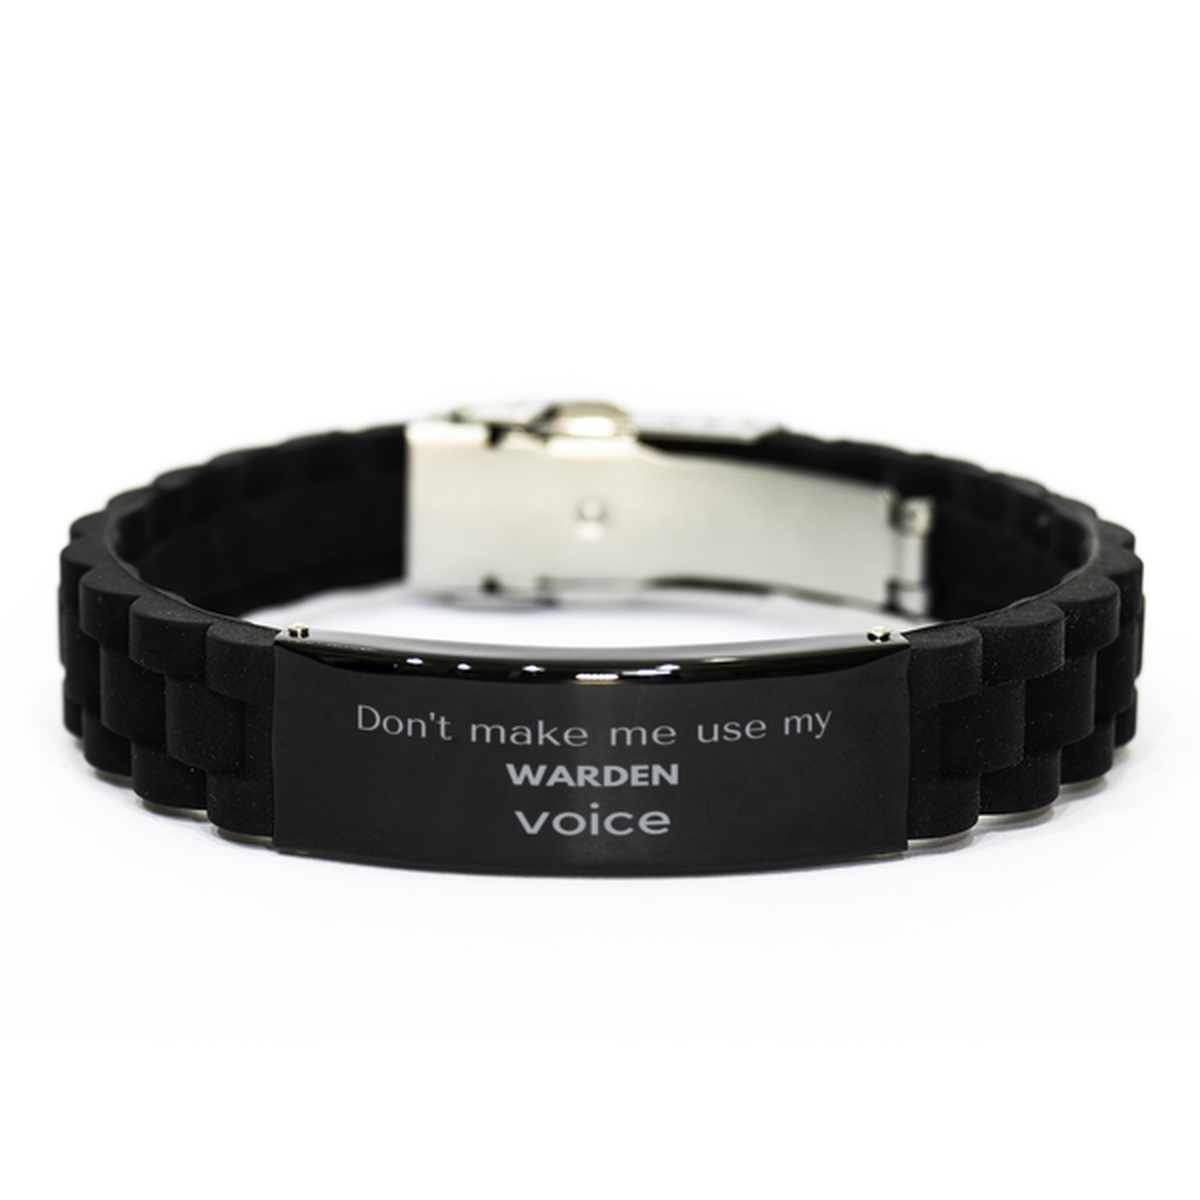 Don't make me use my Warden voice, Sarcasm Warden Gifts, Christmas Warden Black Glidelock Clasp Bracelet Birthday Unique Gifts For Warden Coworkers, Men, Women, Colleague, Friends